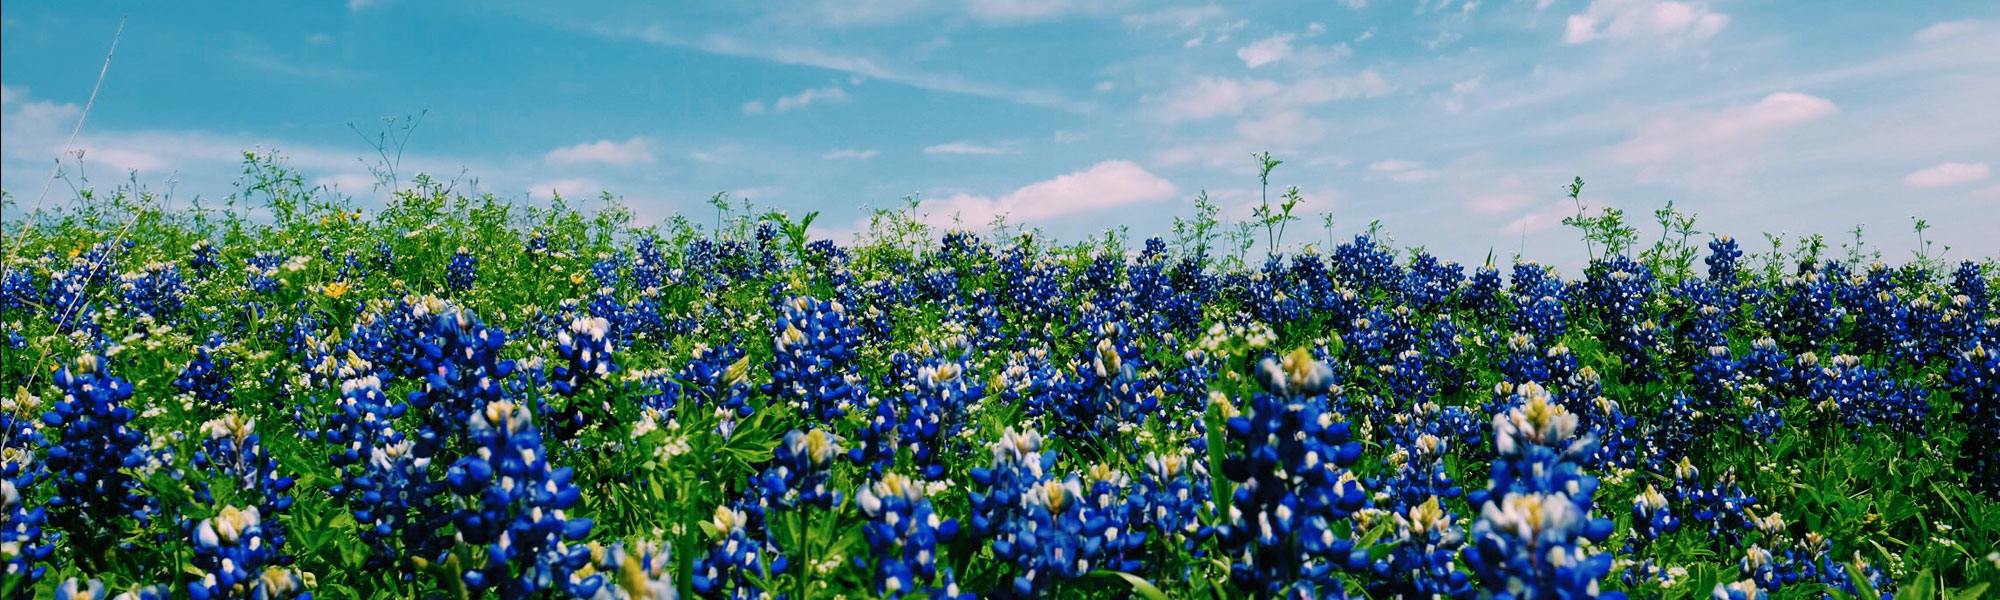 image of bluebonnets spring